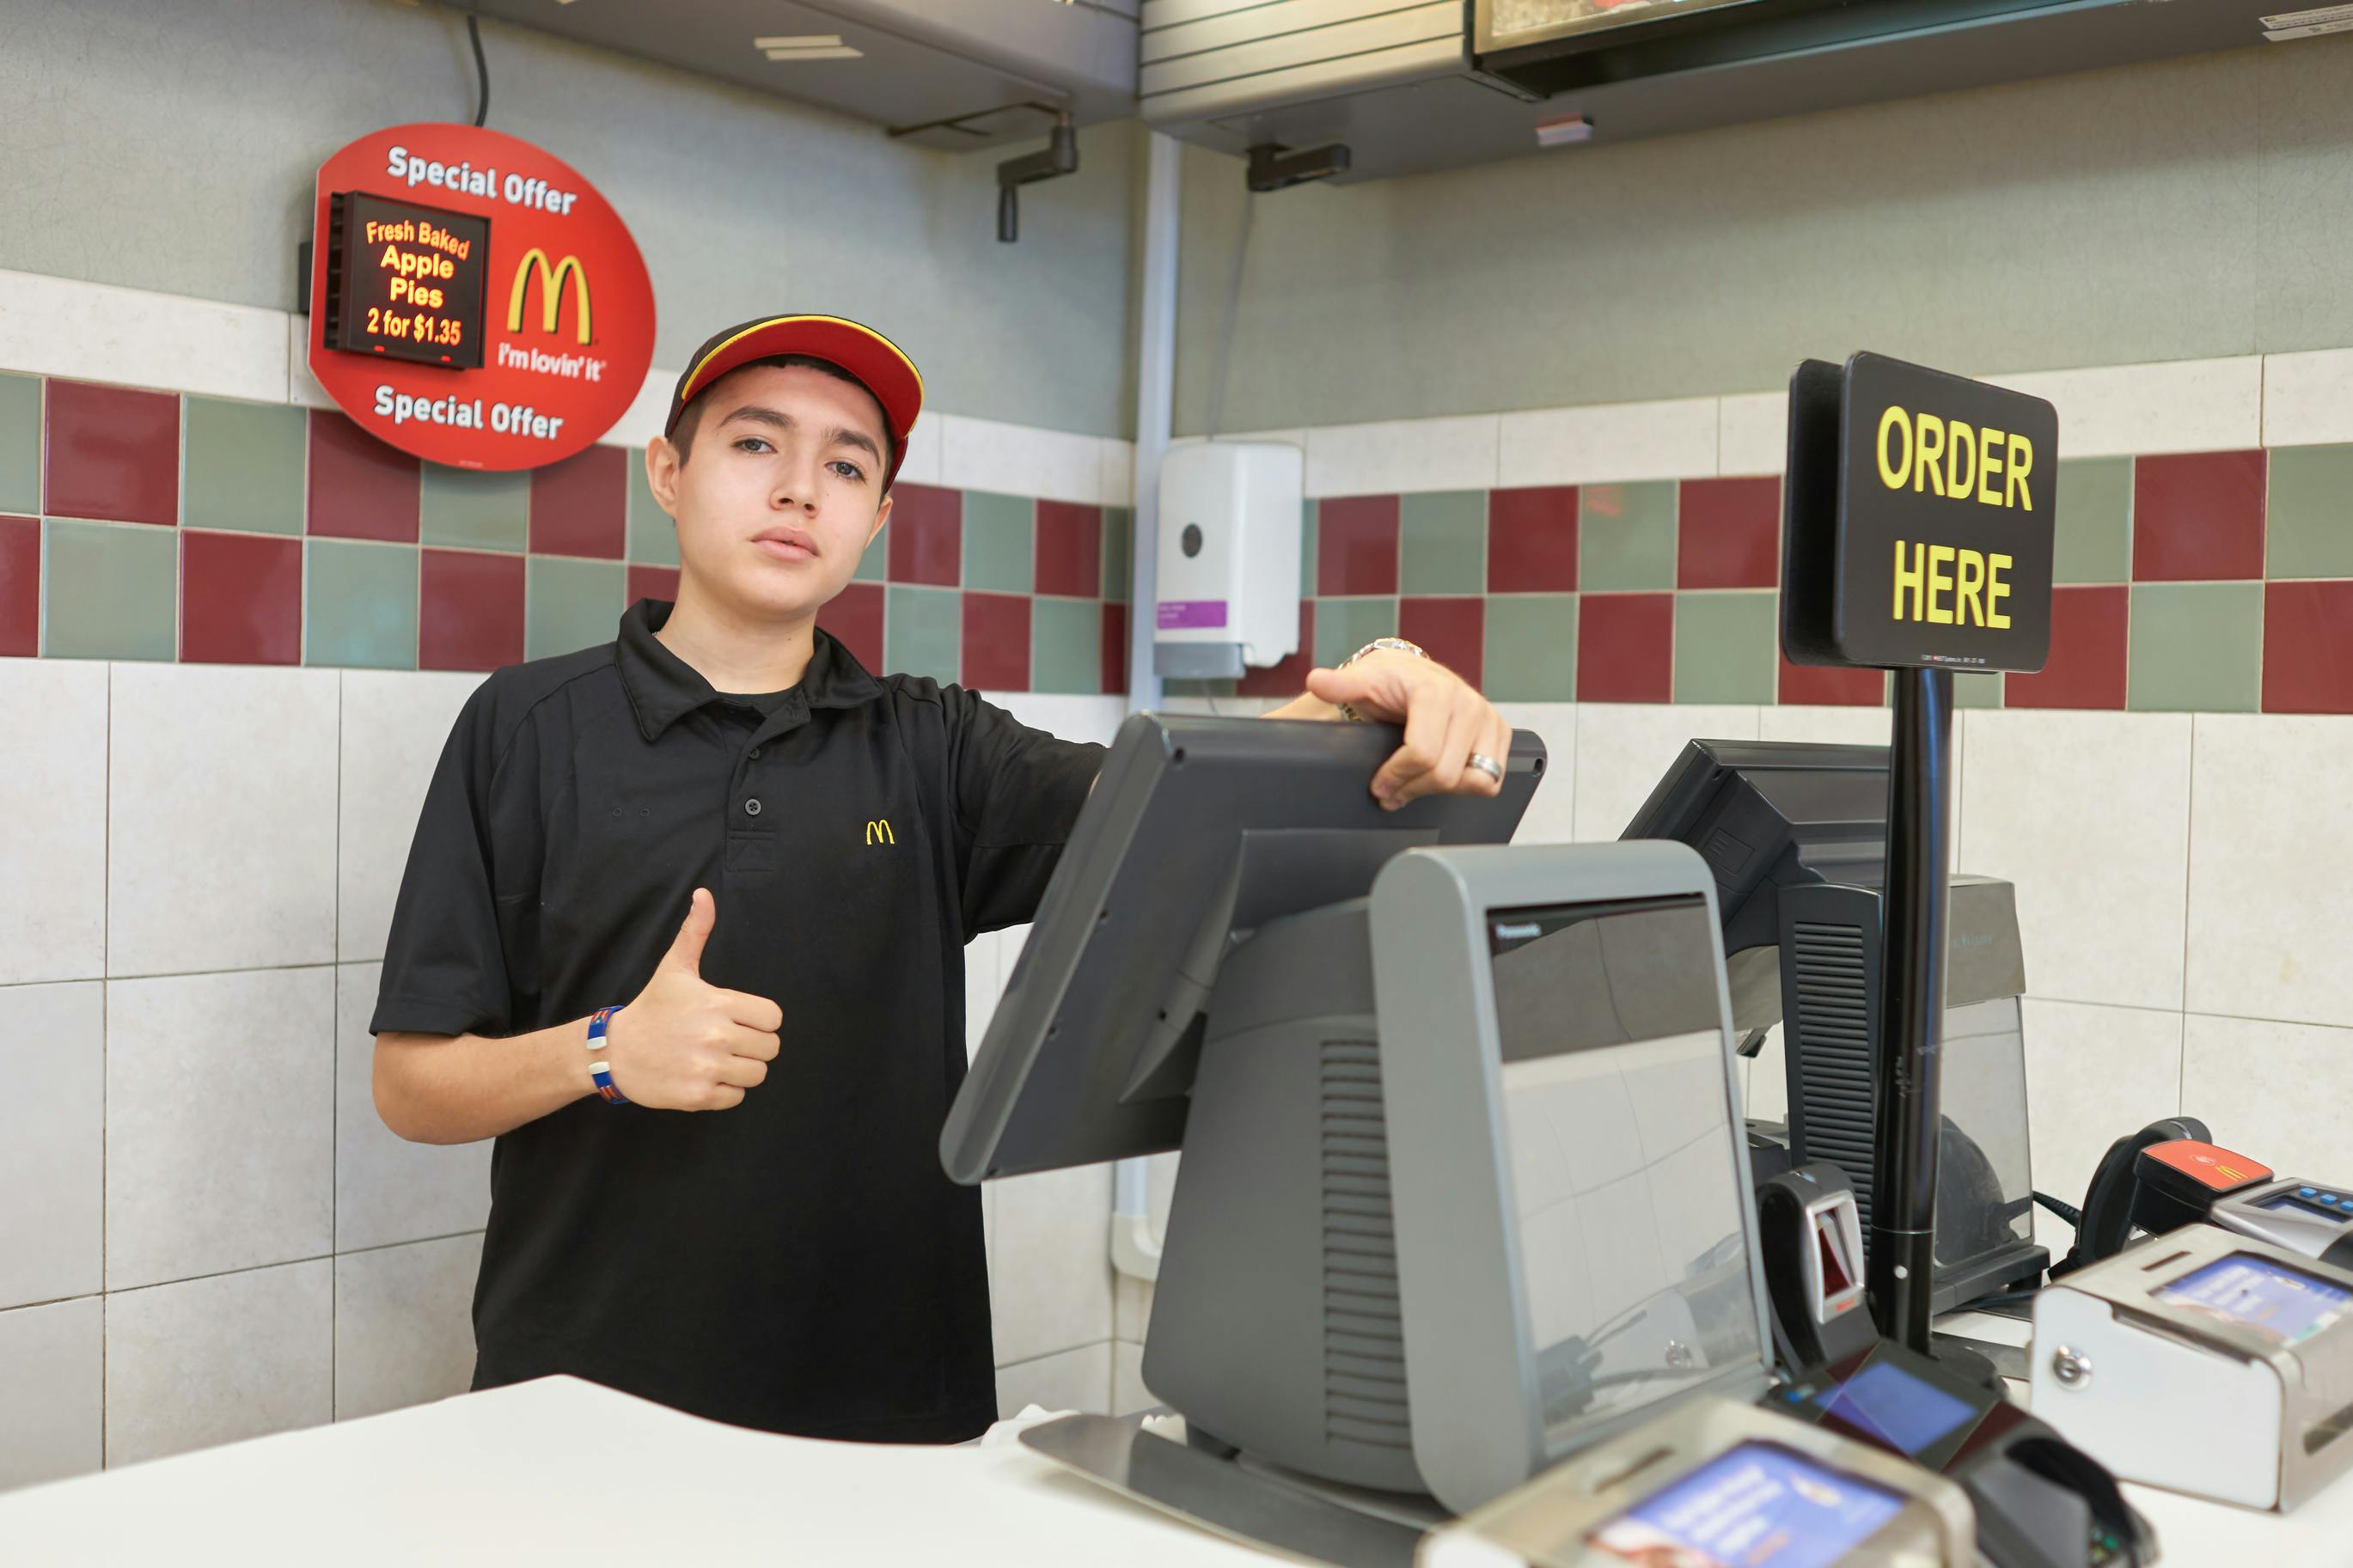 A McDonald's employee giving a thumbs up while standing behind the register at a McDonald's restaurant.